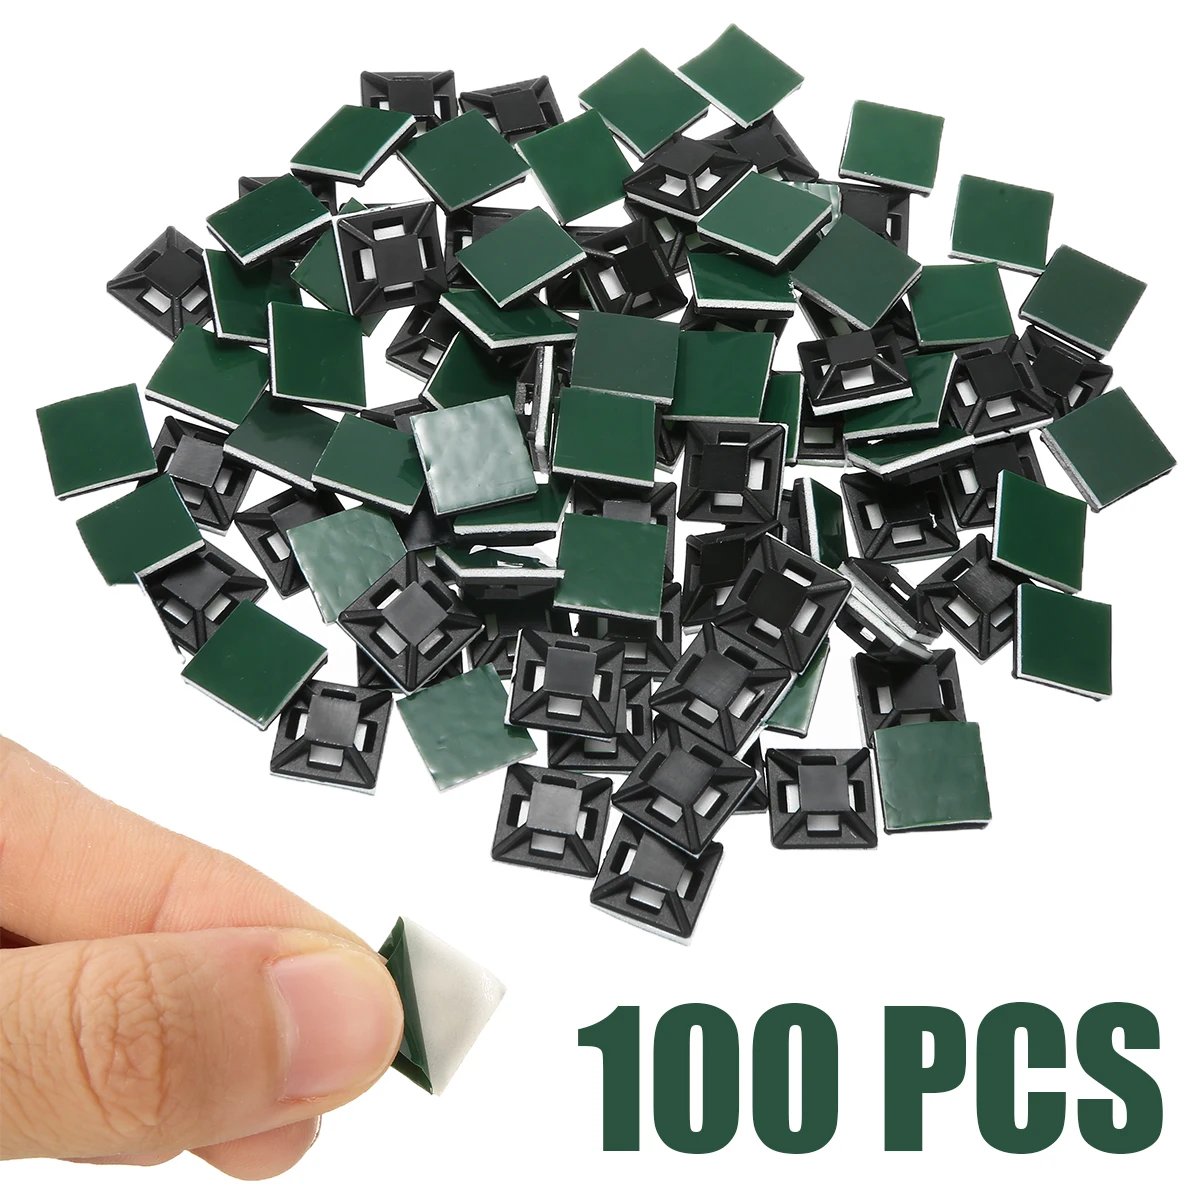 

100pcs Square Self Adhesive Cable Wire Tie Base Mounts Bases Sticky Socket Wall Holder Fixing Seat Clamps 12.5*12.5*4mm Green